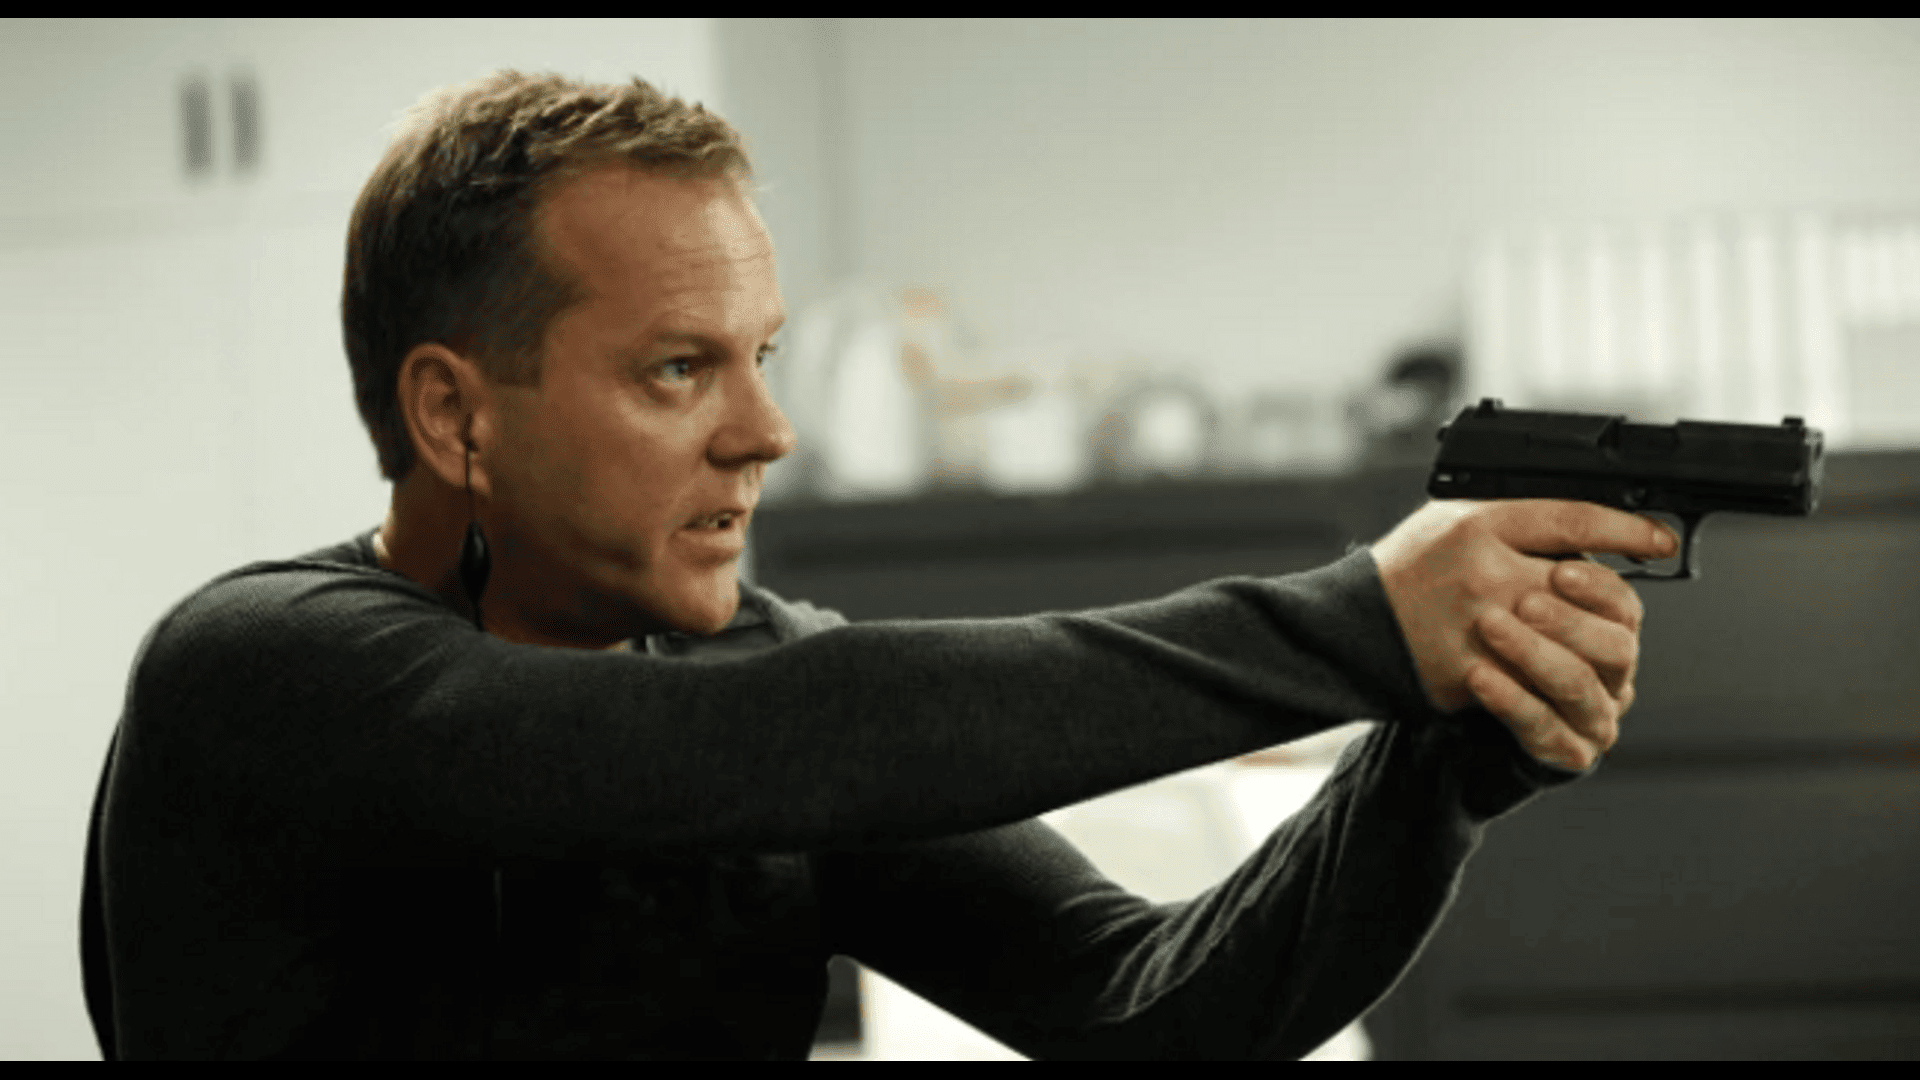 ”kiefer-sutherland-is-ready-to-return-as-jack-bauer”